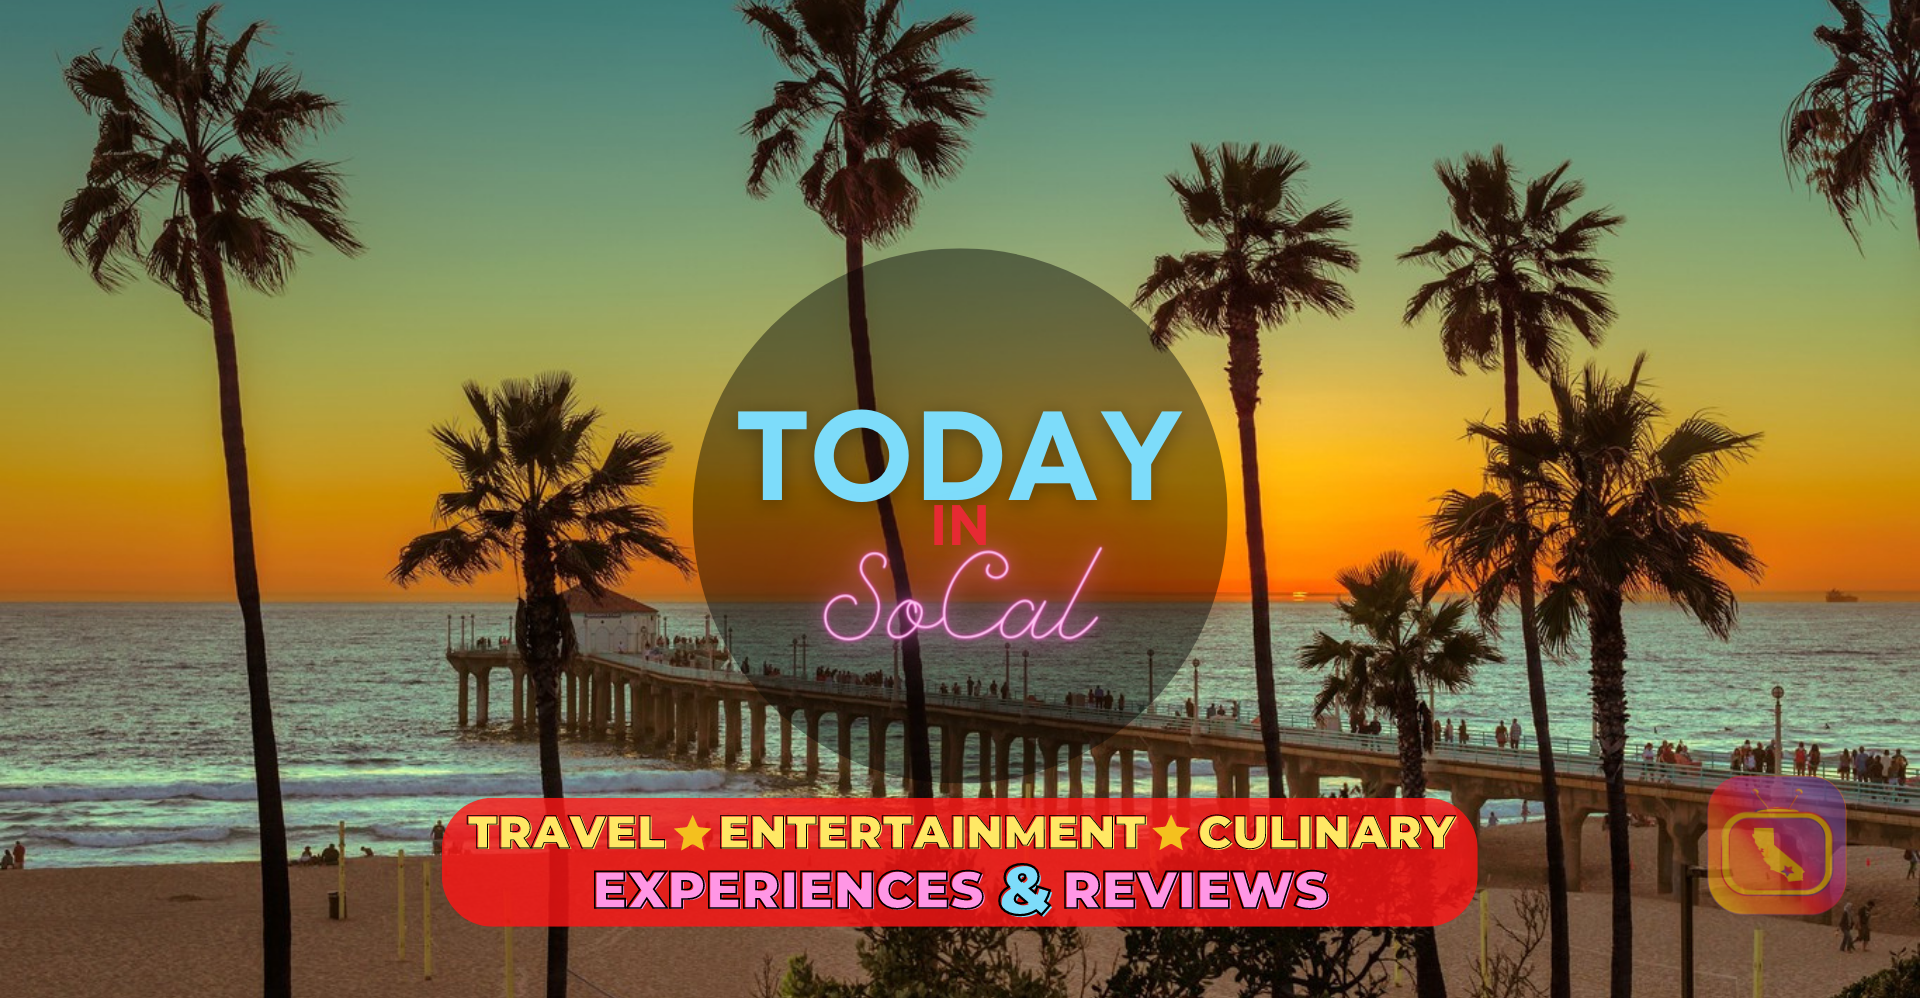 Welcome to... TODAY in SOCAL! Featuring Travel, Entertainment & Culinary Experiences and Reviews You have to See When Visiting Southern California.